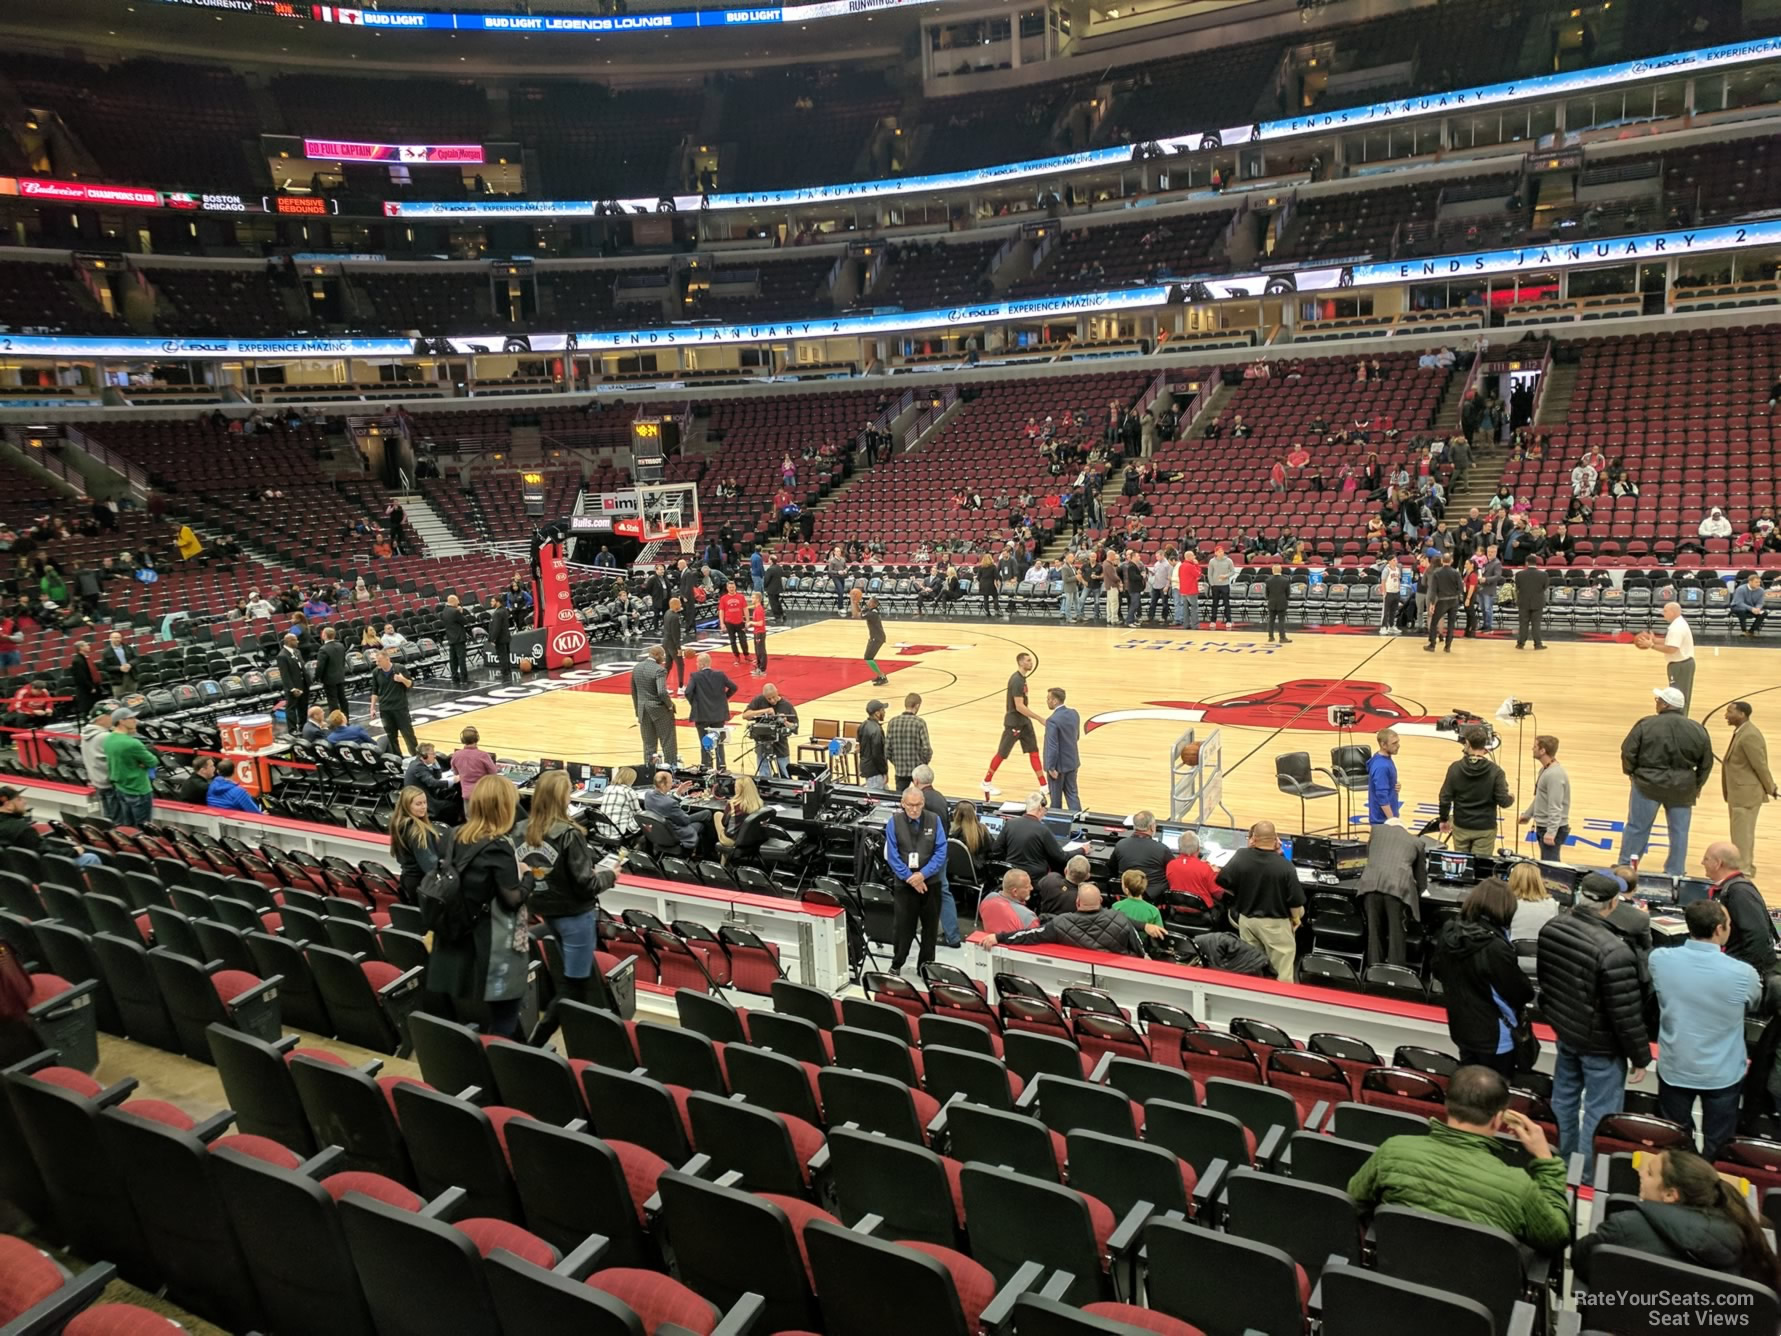 Section 122 at United Center - RateYourSeats.com